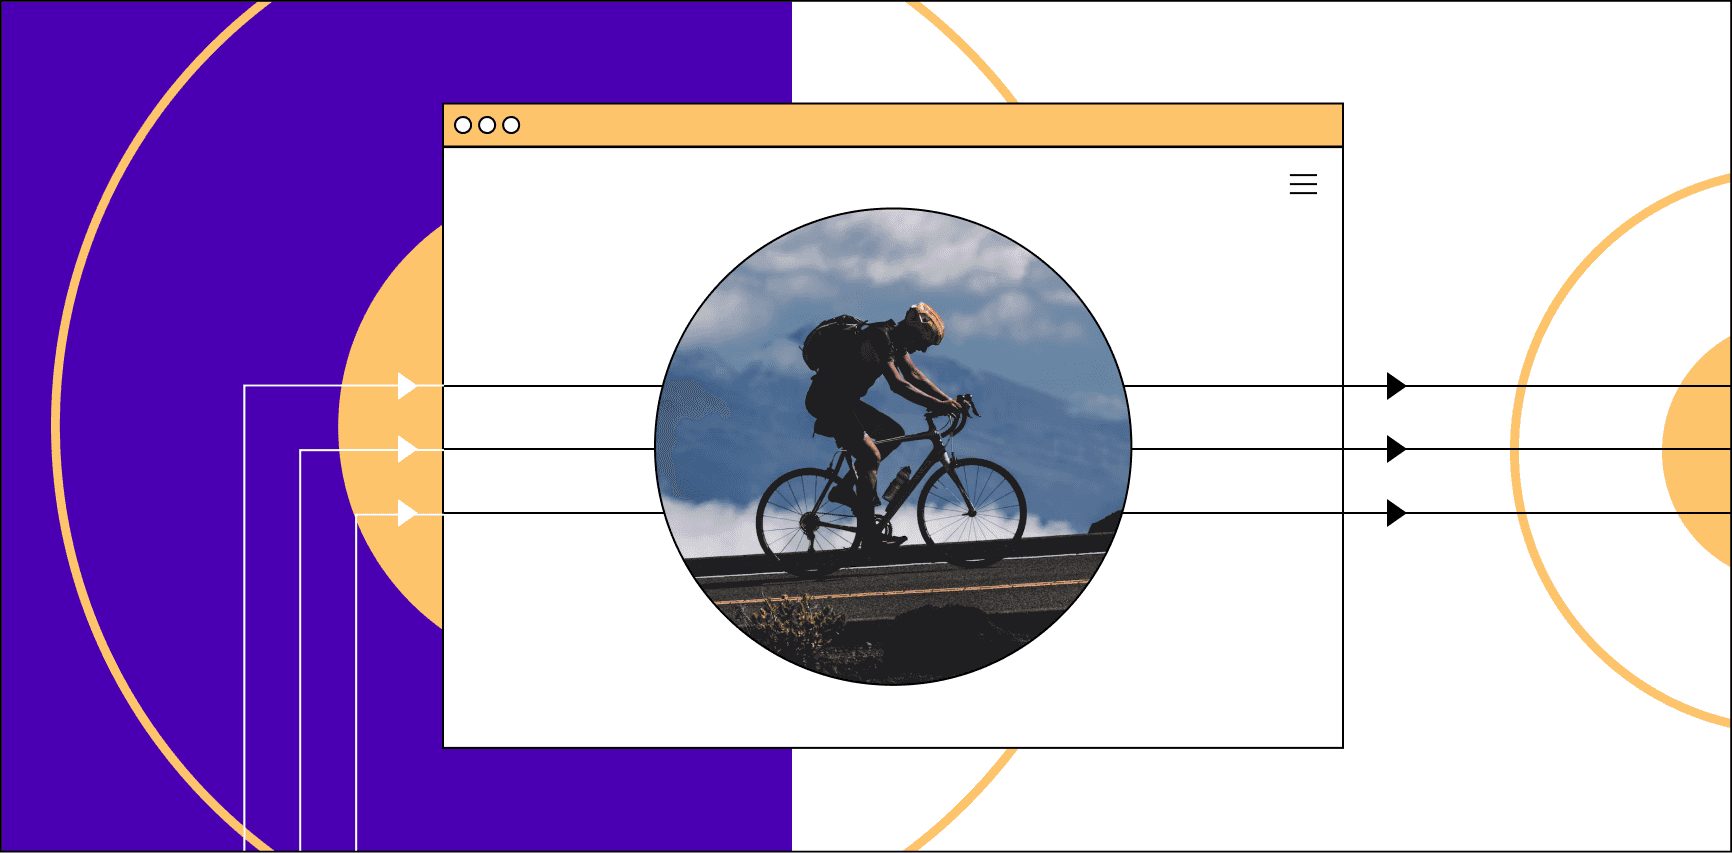 A mountain biker makes his way uphill. He is surrounded by geometric lines, circles, and arrows pointing his way. He is framed as if in the context of a web page. Illustration.